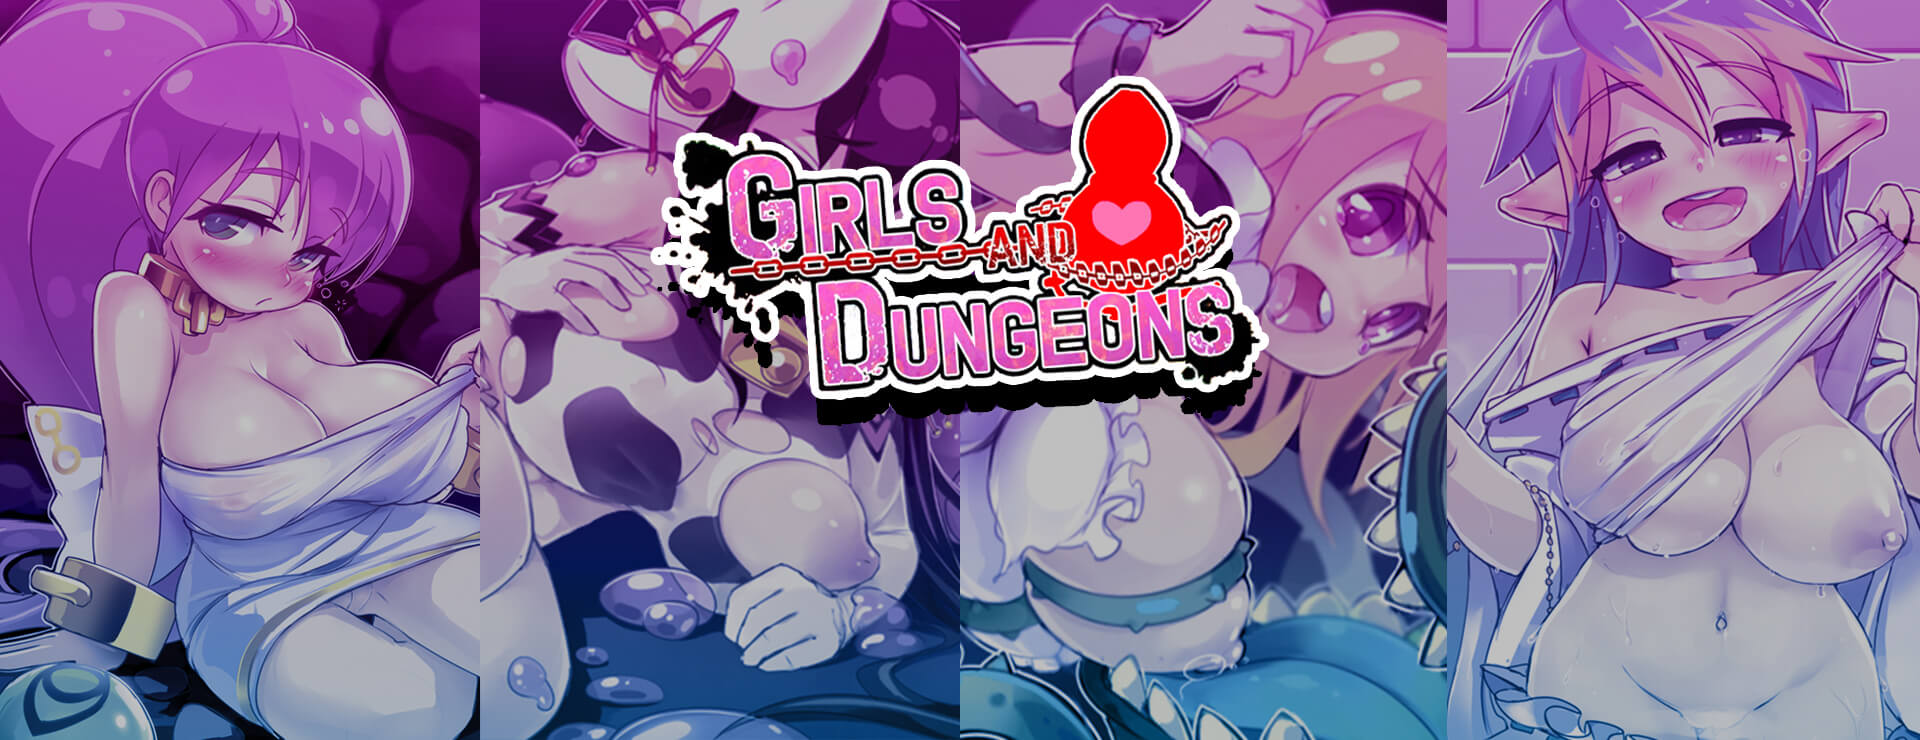 Girls And Dungeons - RPG Juego